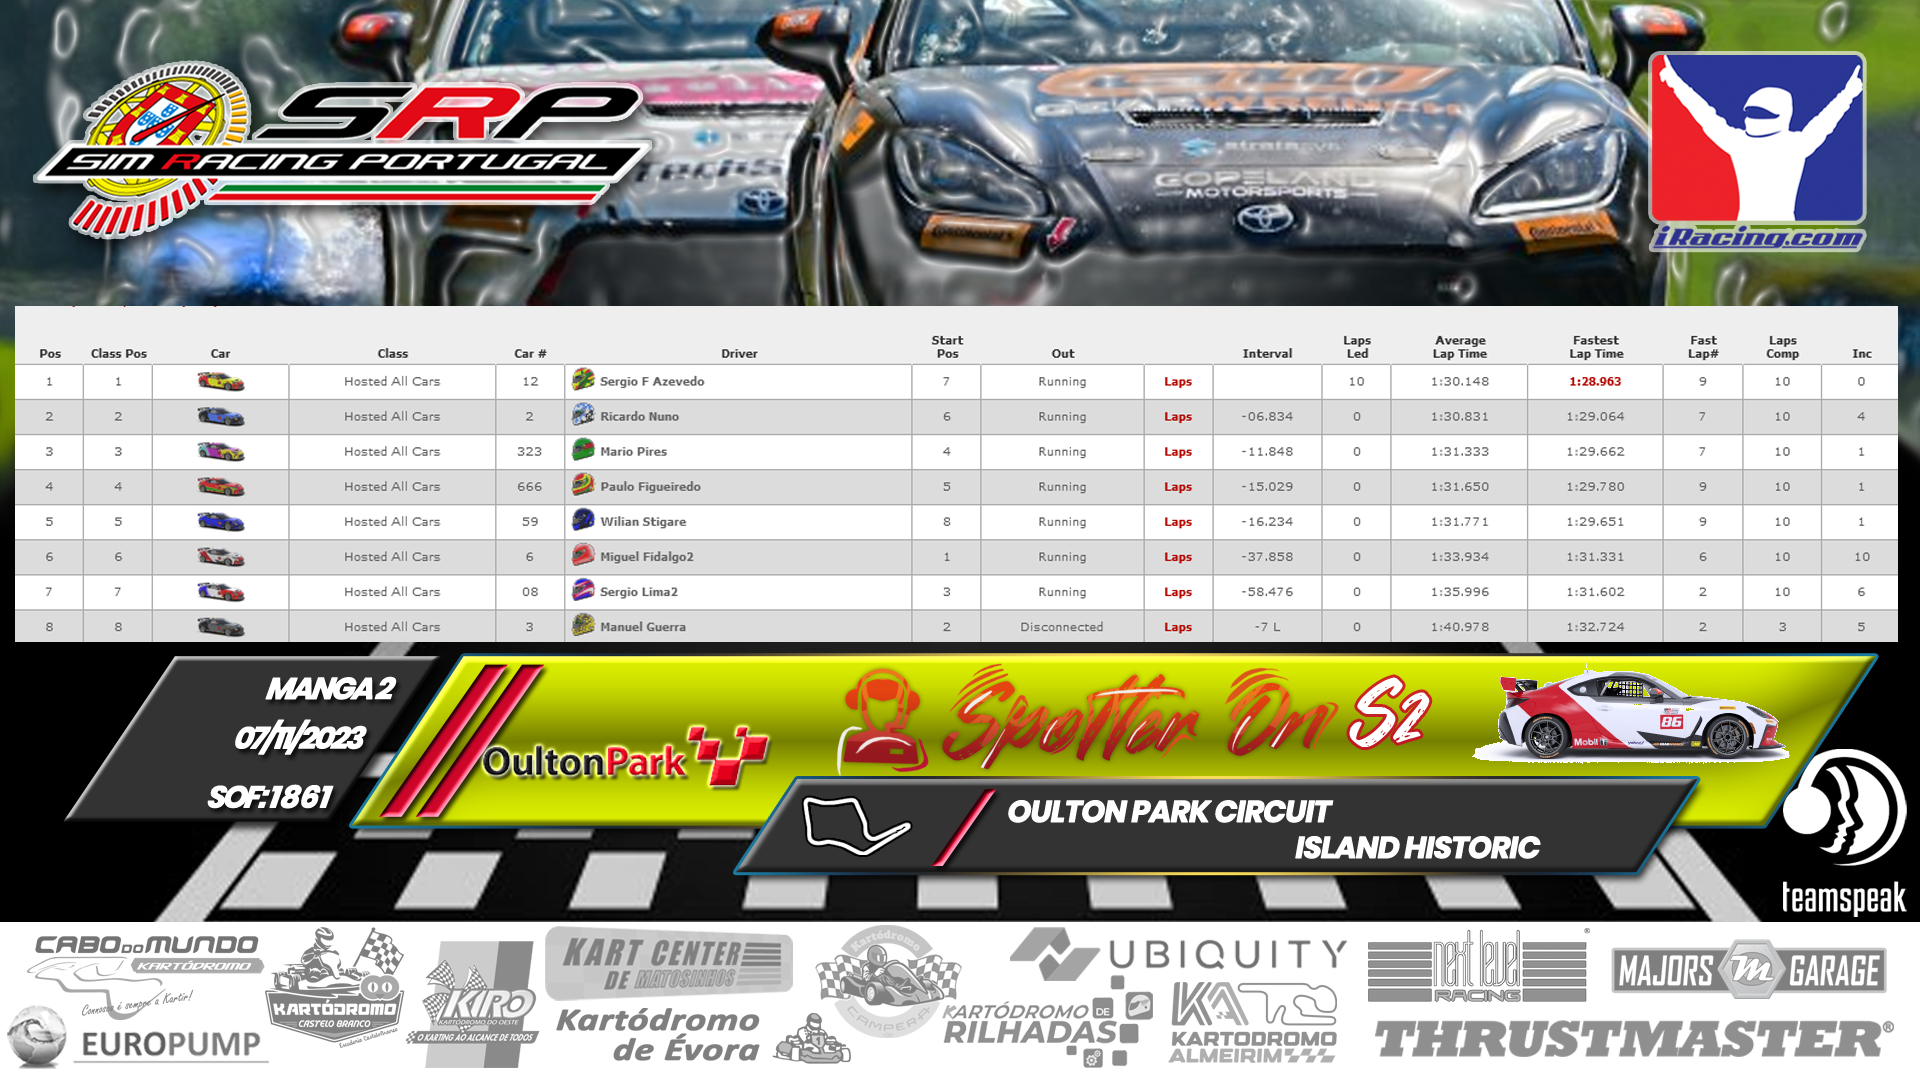 [Image: RaceResults-SpotterOnS2-2-1.png]